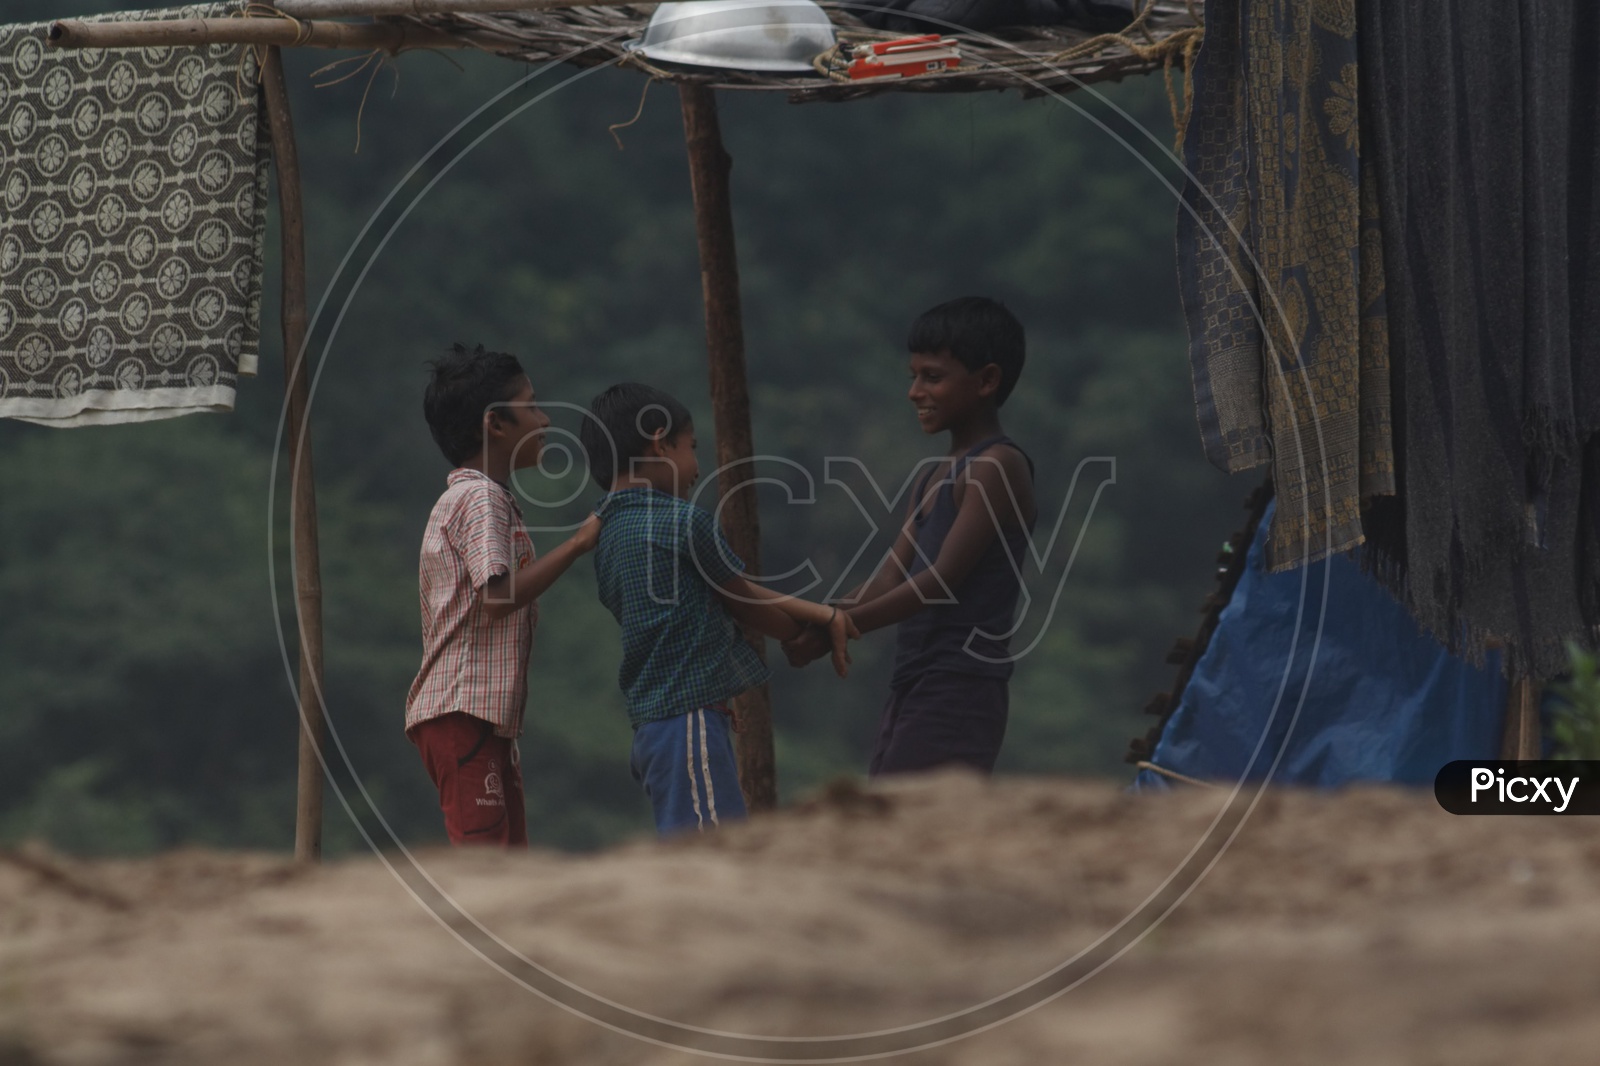 Three boys playing with each at the bank of river godavari.